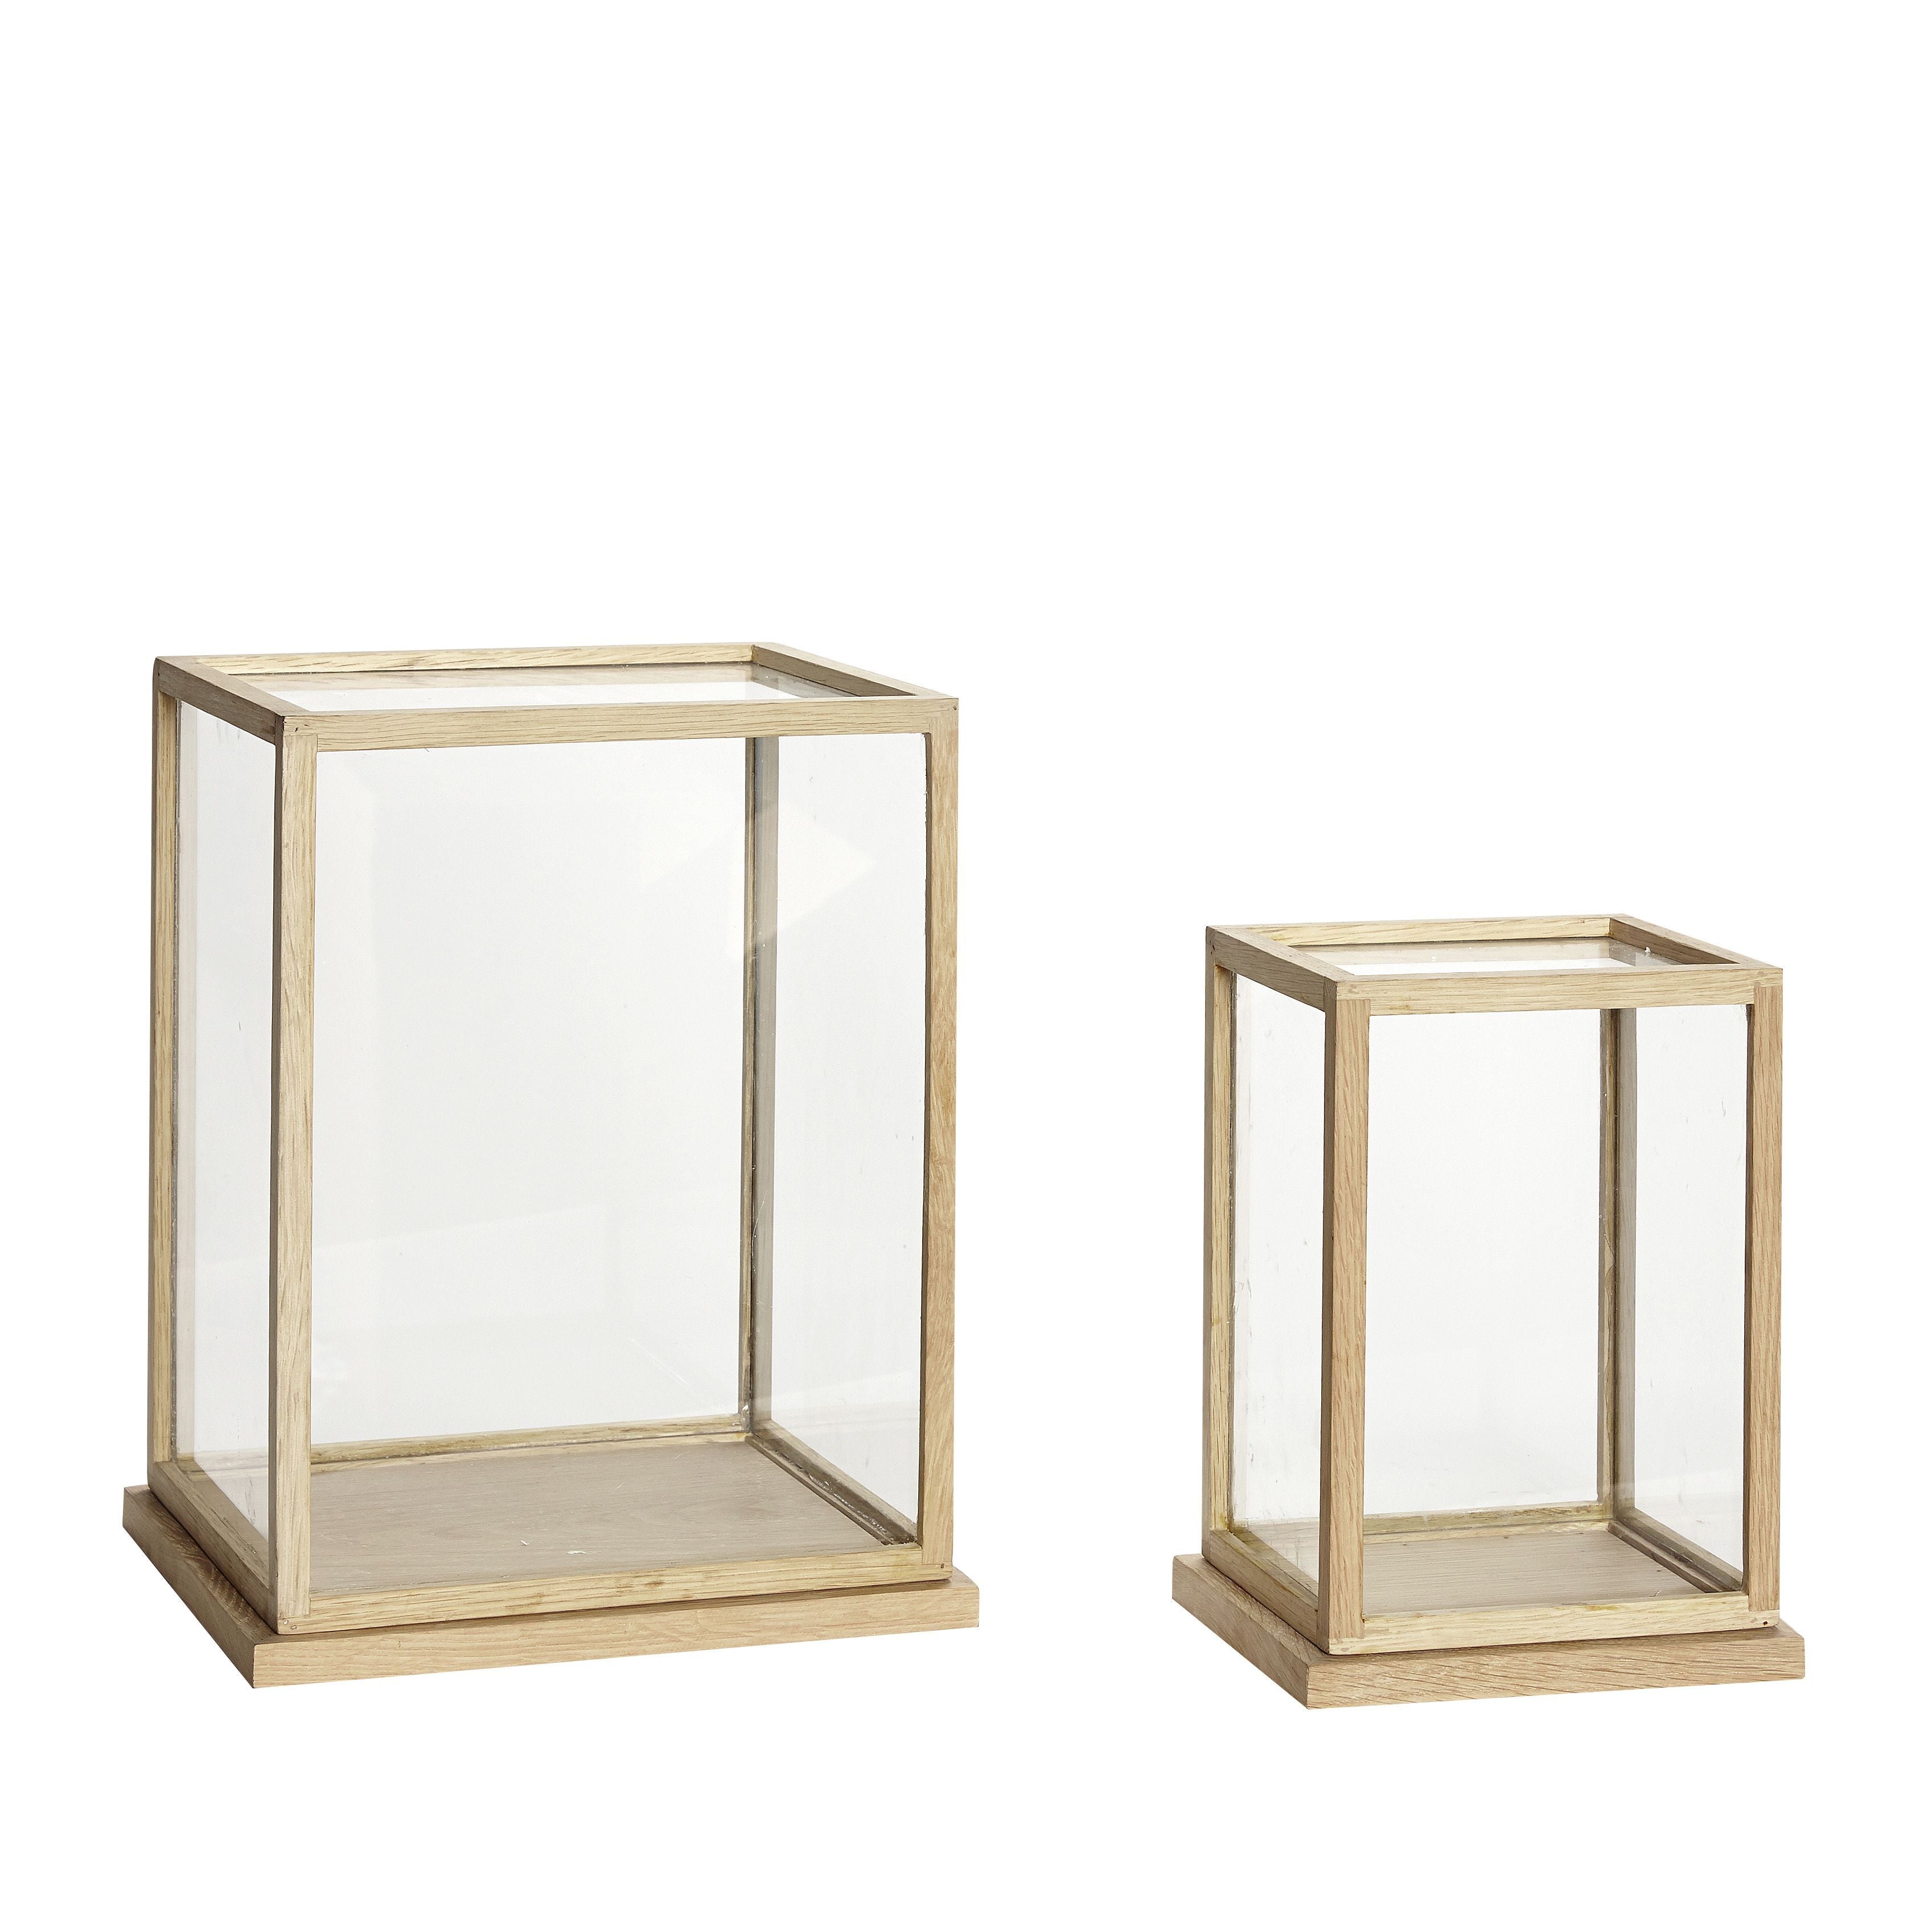 Hübsch Spectacle Display Boxes Set Of 2, Large